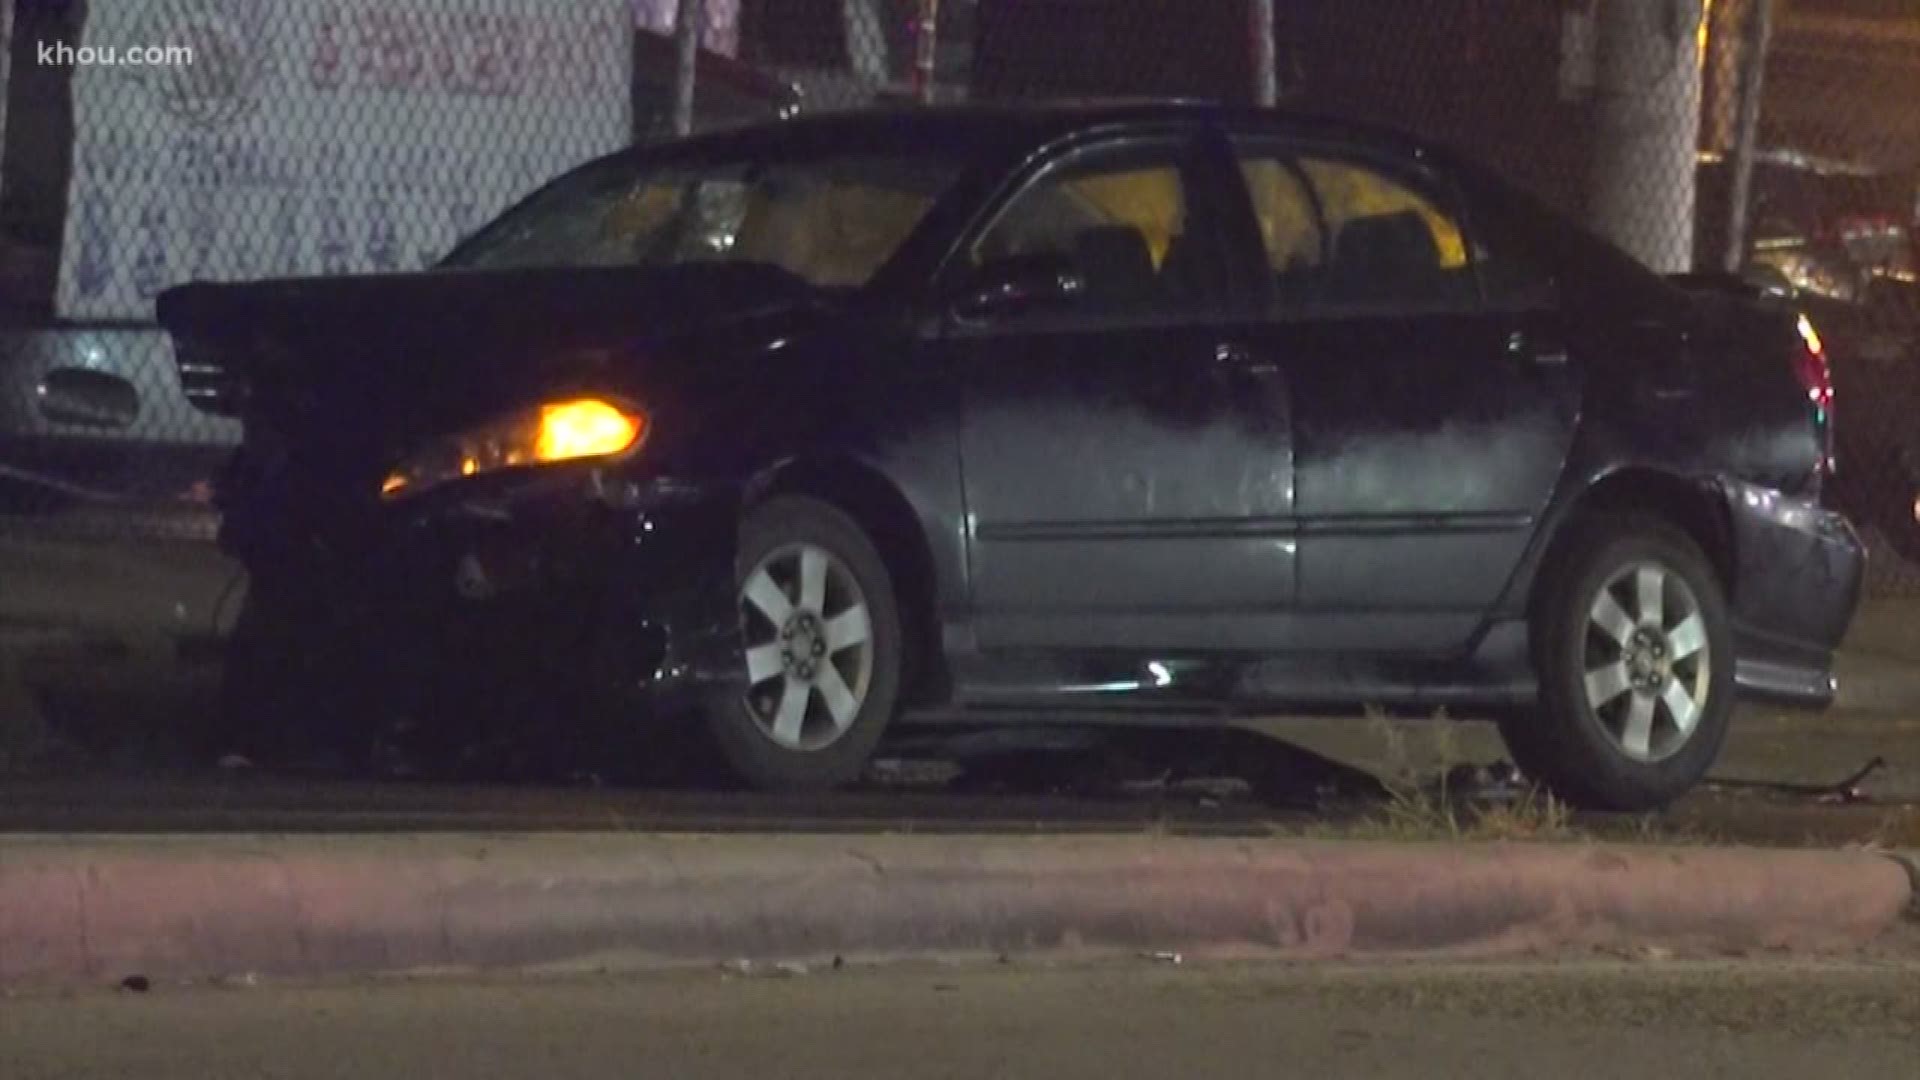 Houston police are looking for four people who fled the scene of a major accident involving three children.